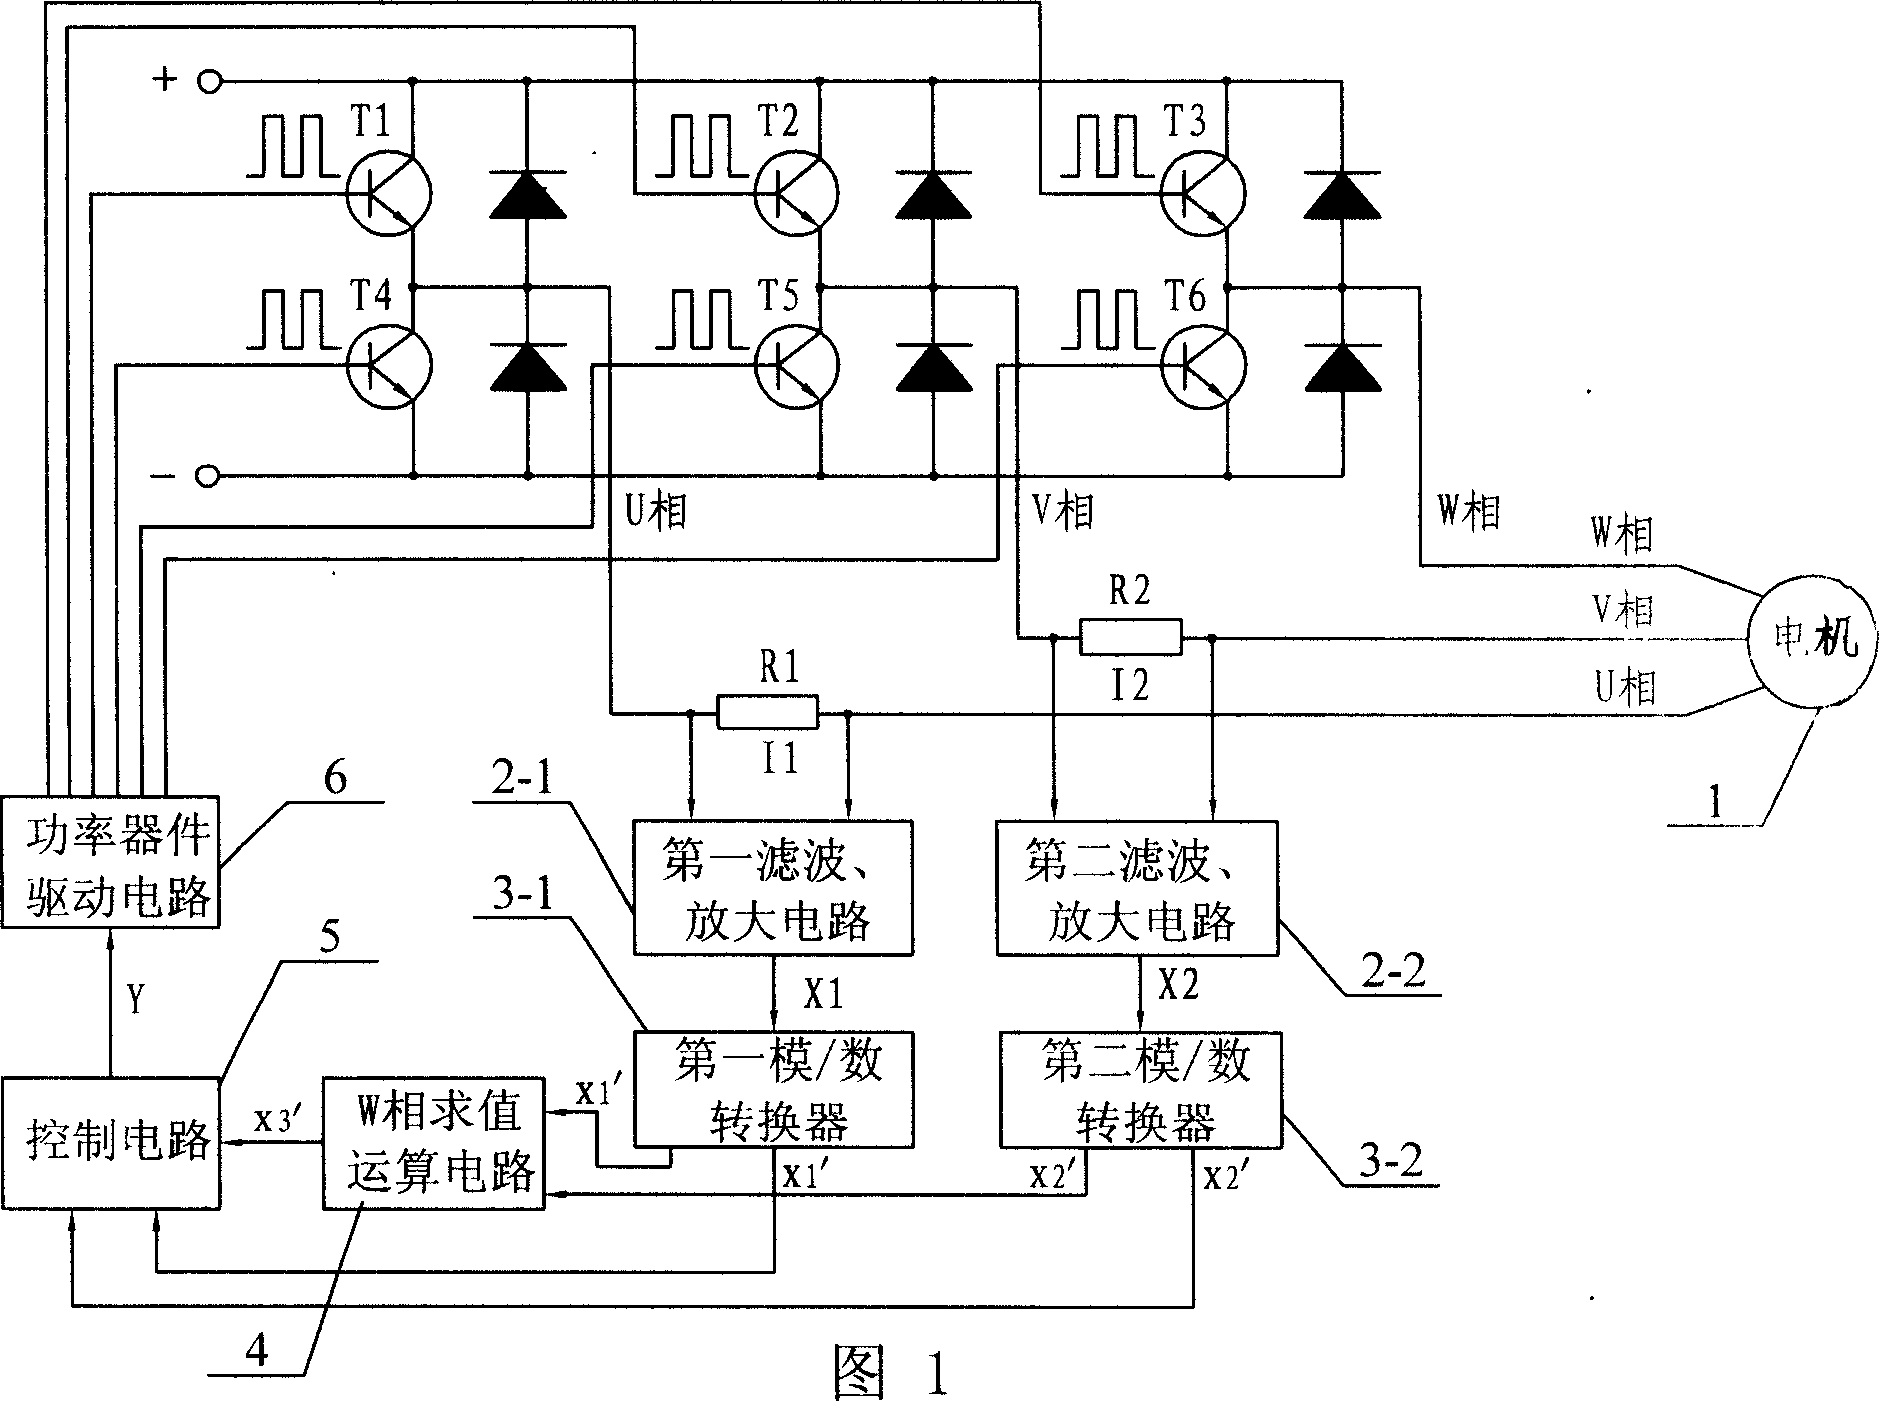 Compensation method used for pulse width modulation conversion technique dead angle